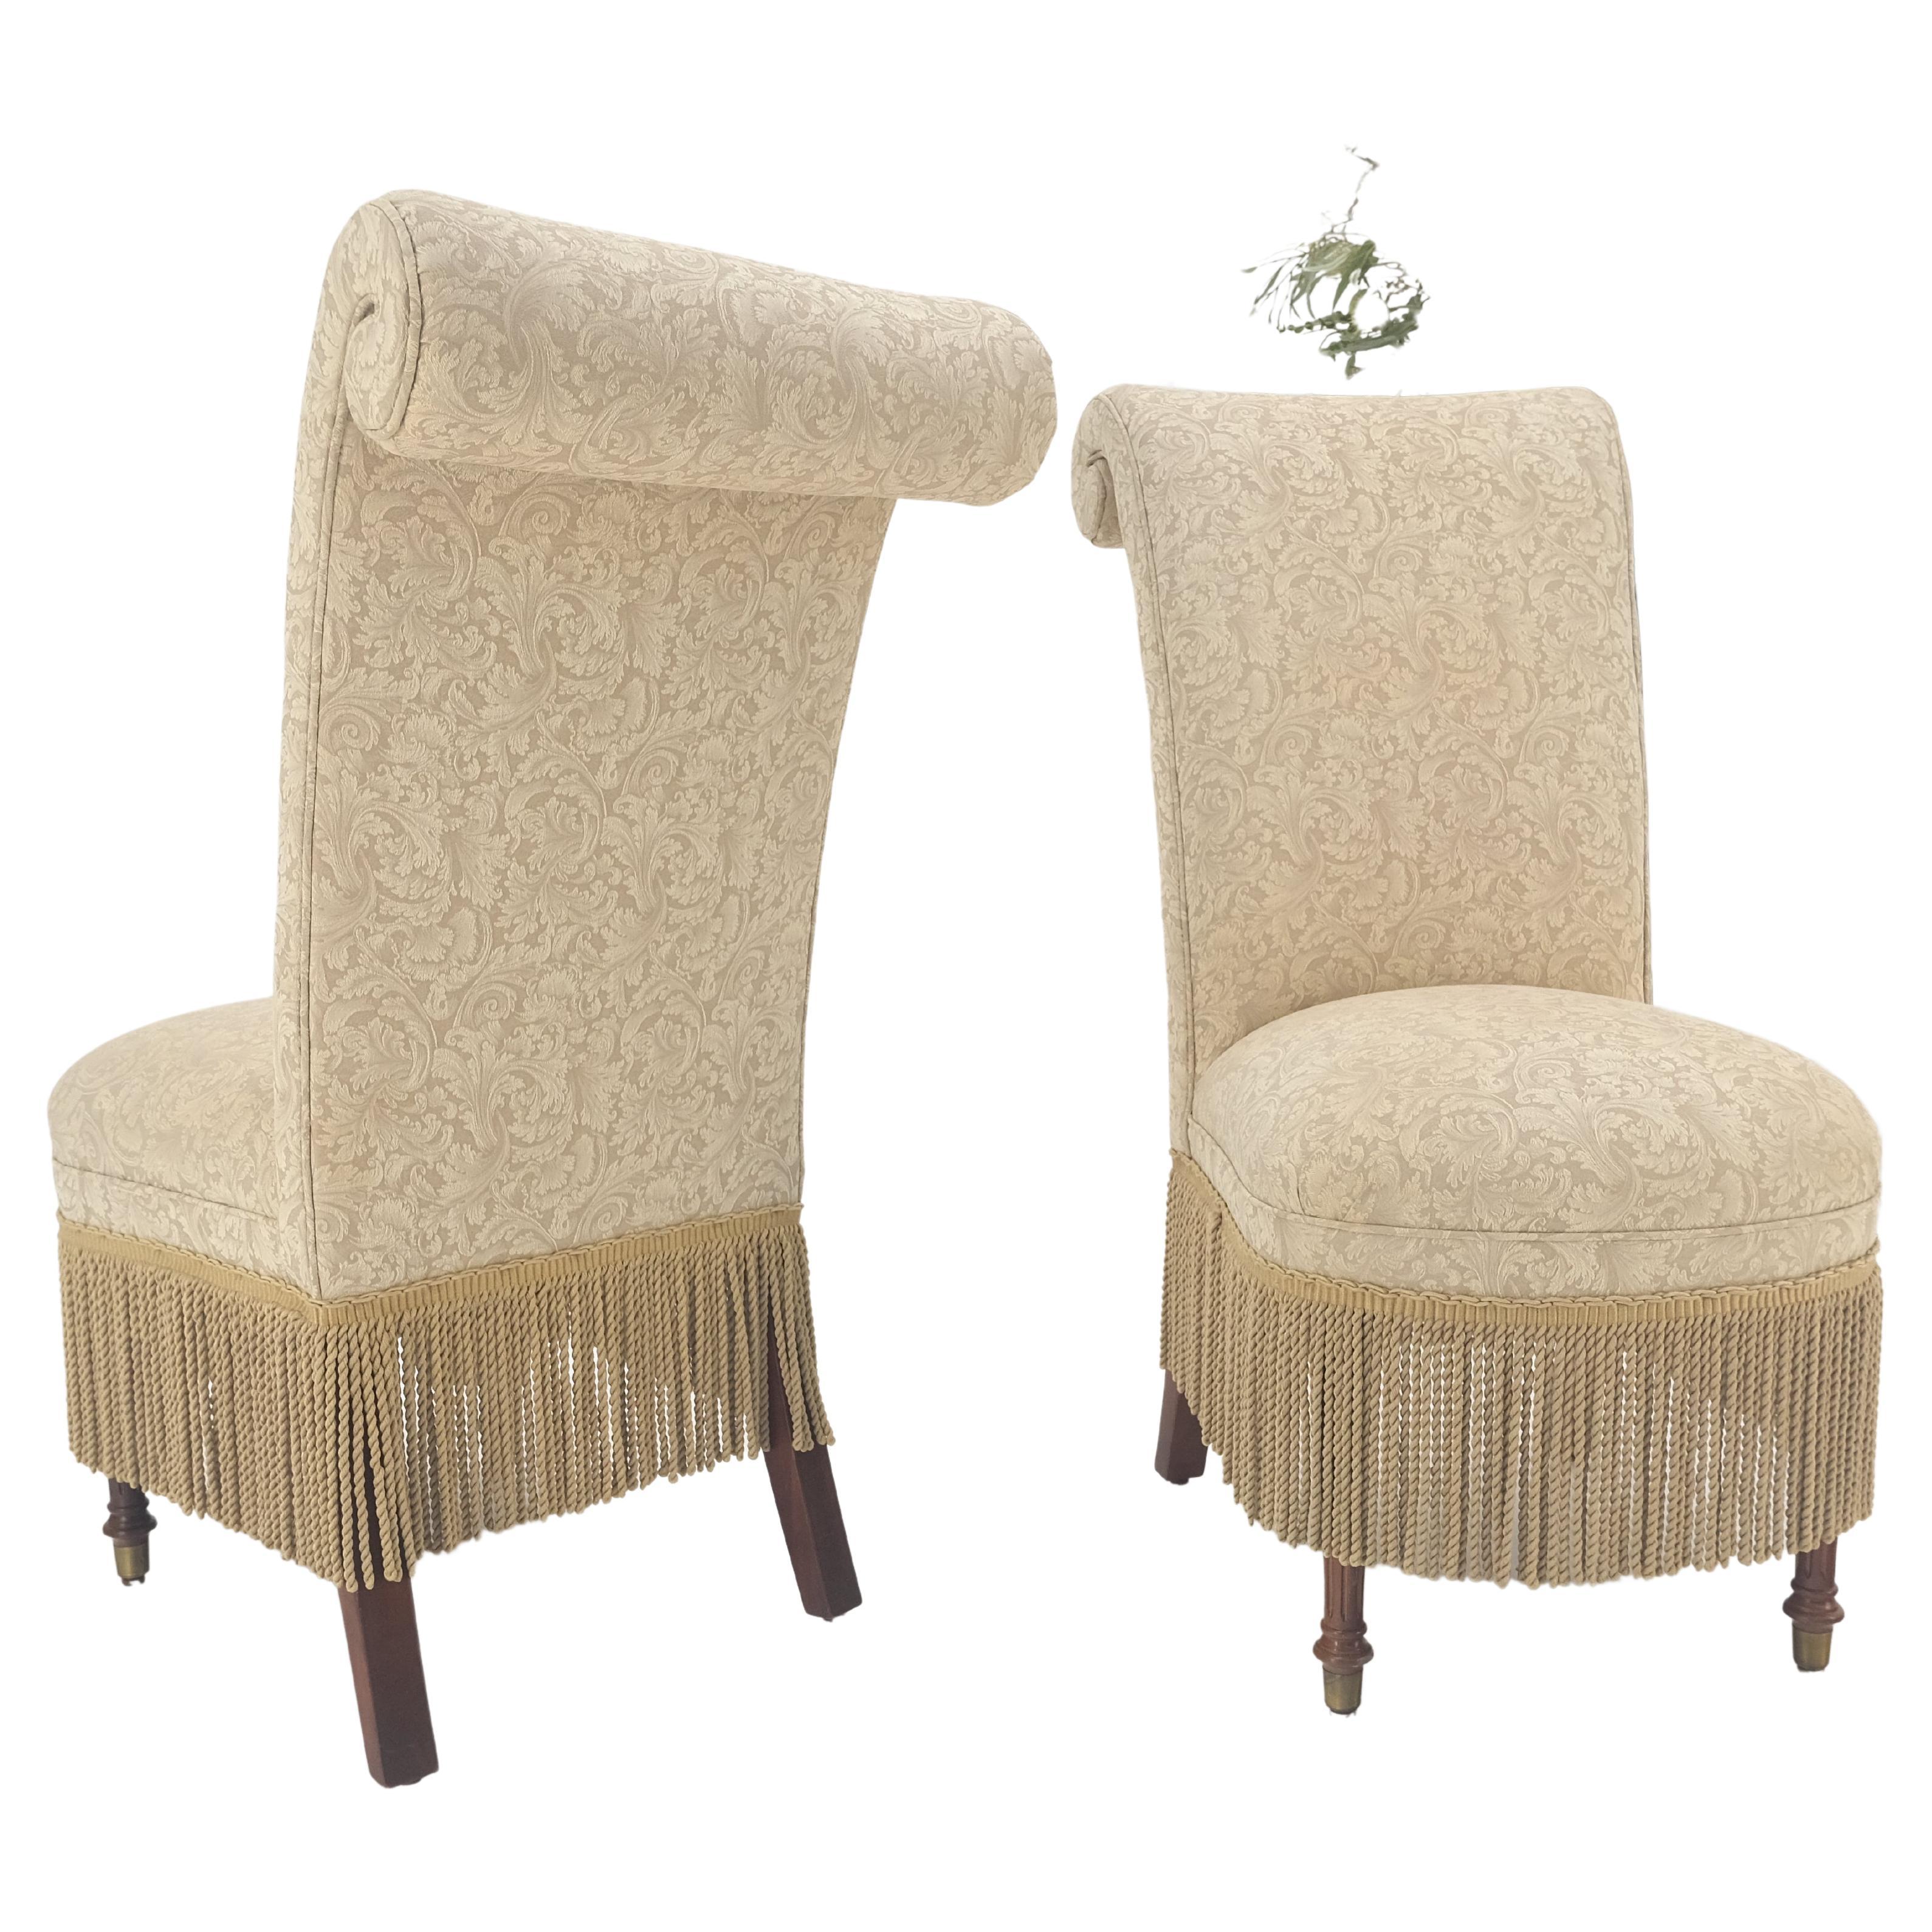 Pair Decorative Turned Mahogany Legs Tassels Decorated Fireside Slip Chair MINT! For Sale